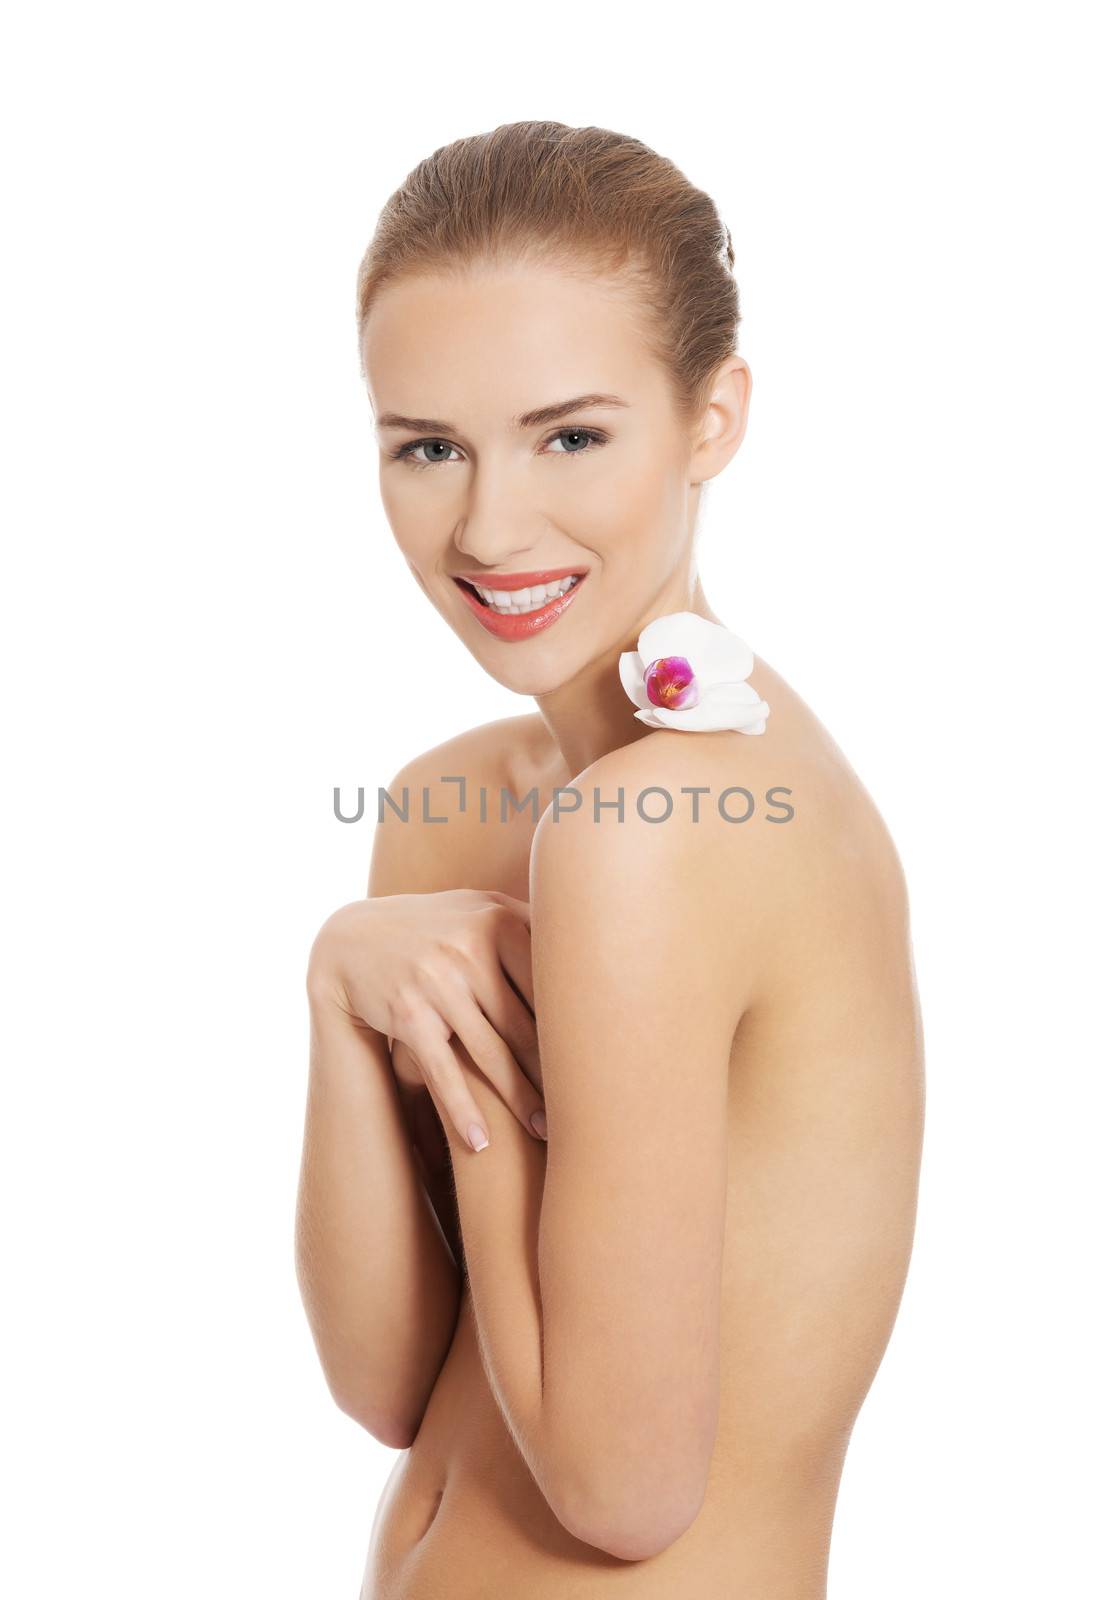 Nude naked woman having white flower on shoulders. Isolated on white.